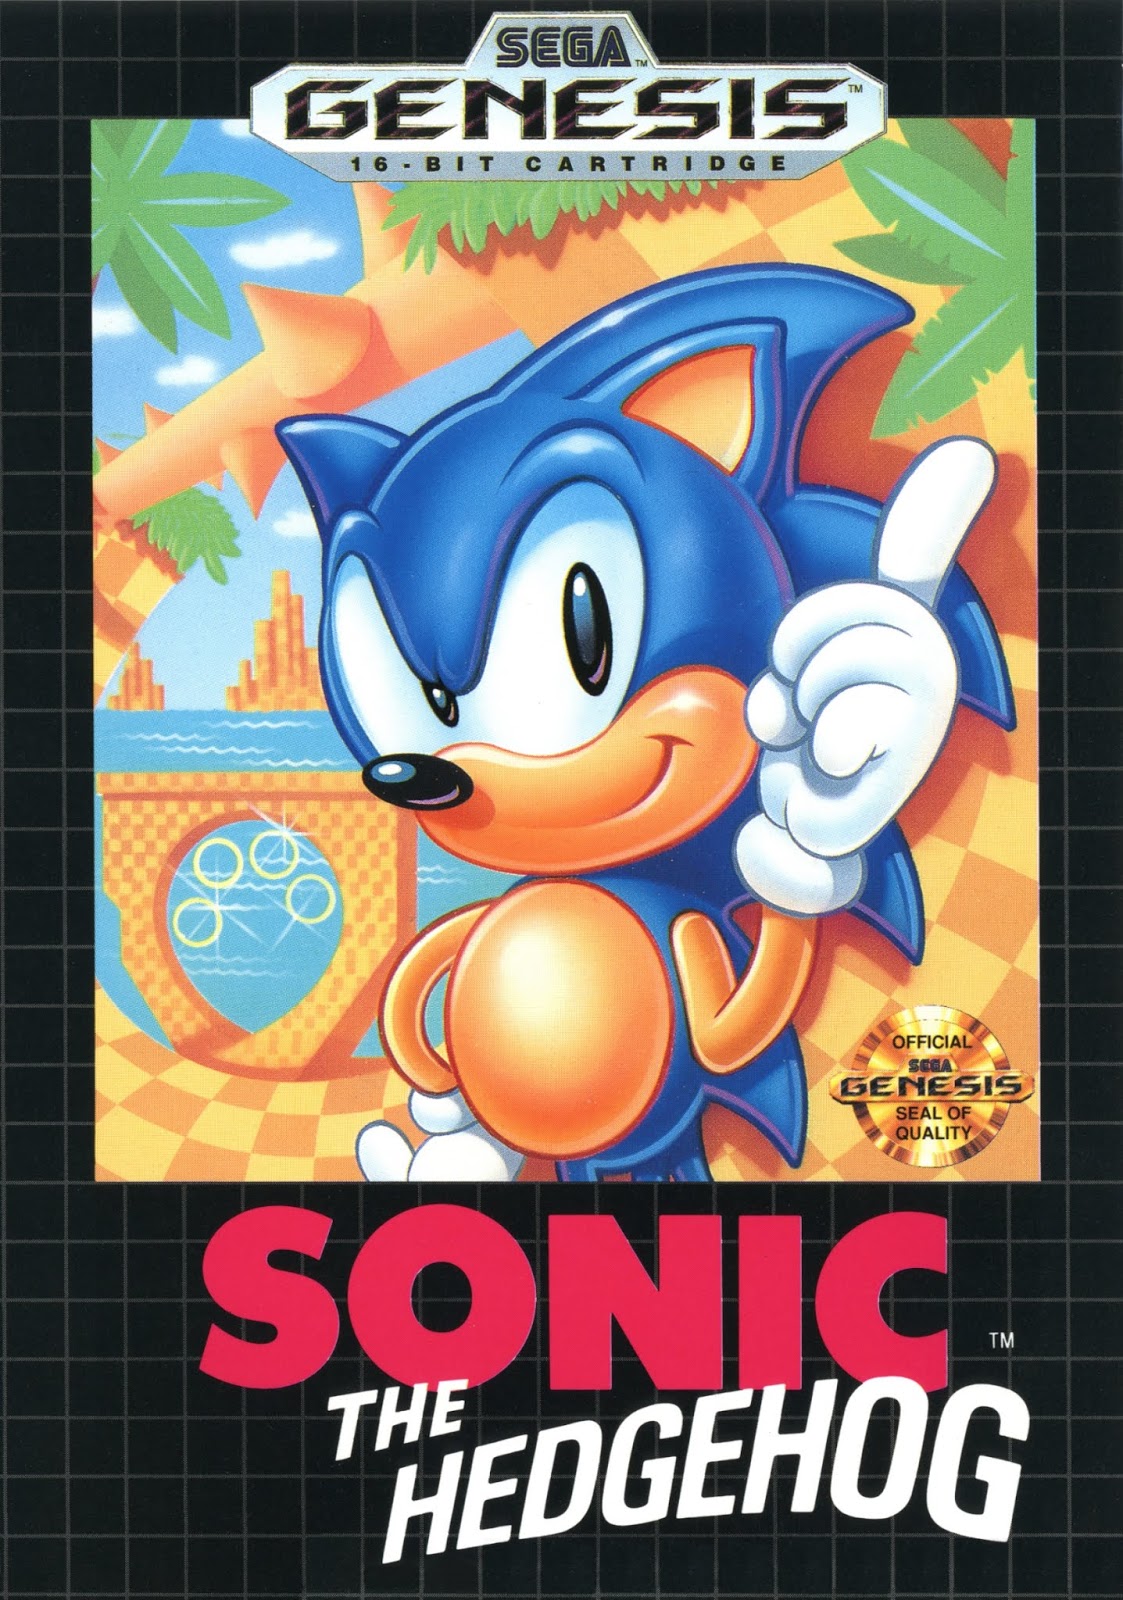 Did You Know Gaming? — Sonic The Hedgehog 2 (Genesis/Mega Drive). Cheat